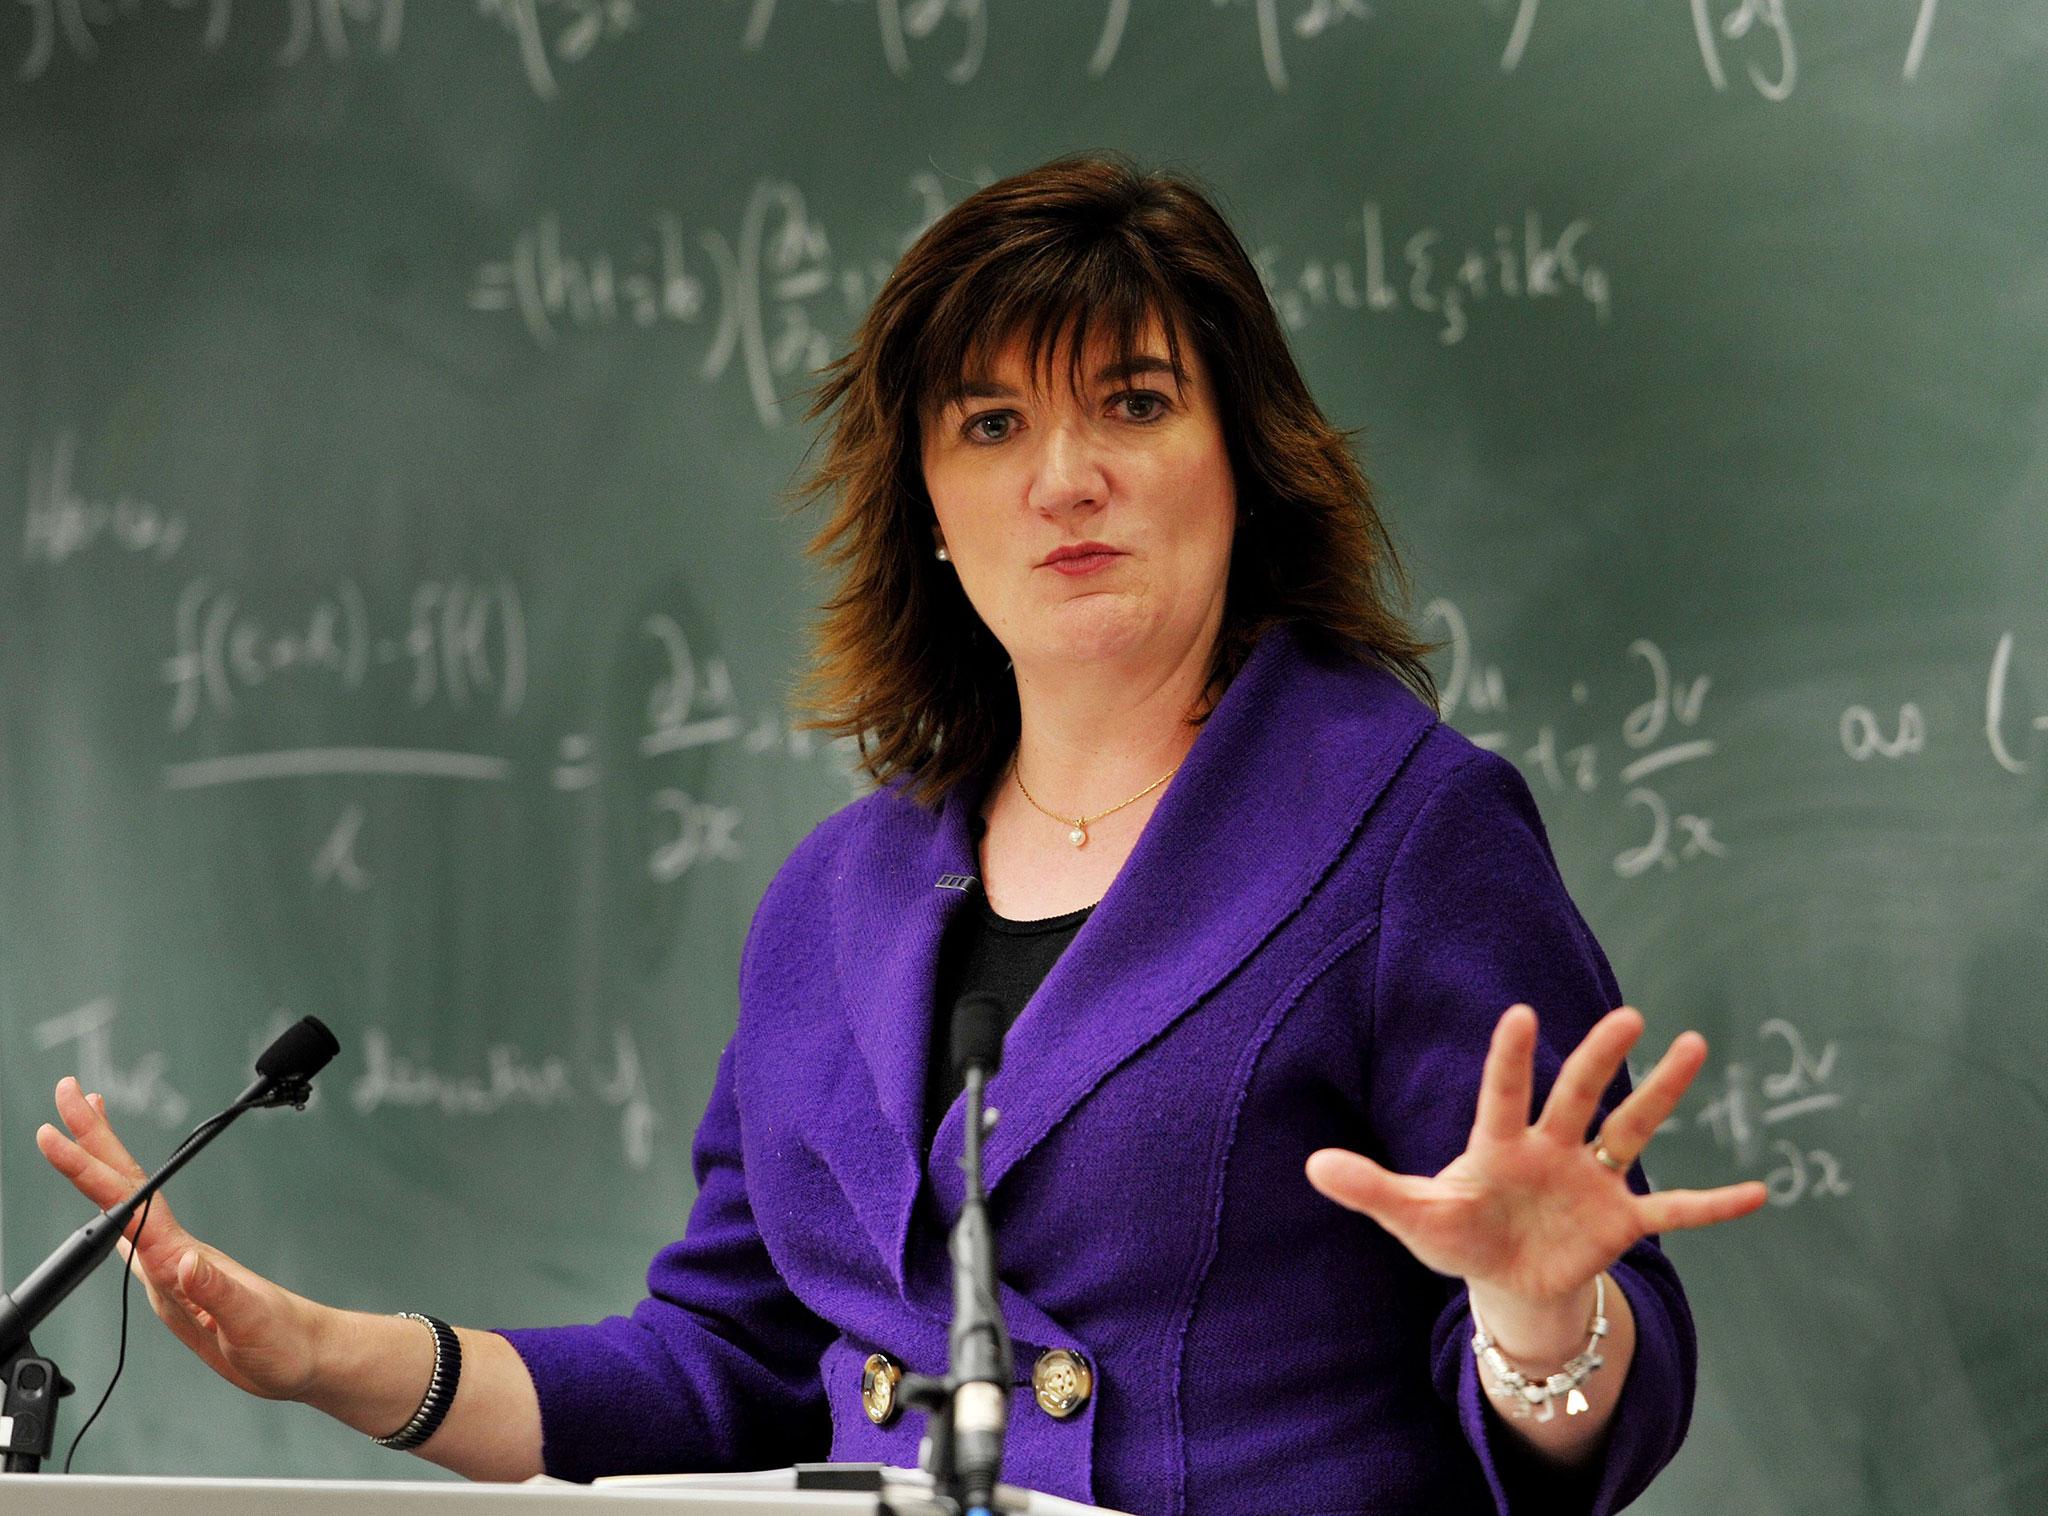 Nicky Morgan, who has been accused of 'deceiving the public' over funding cuts by a union leader